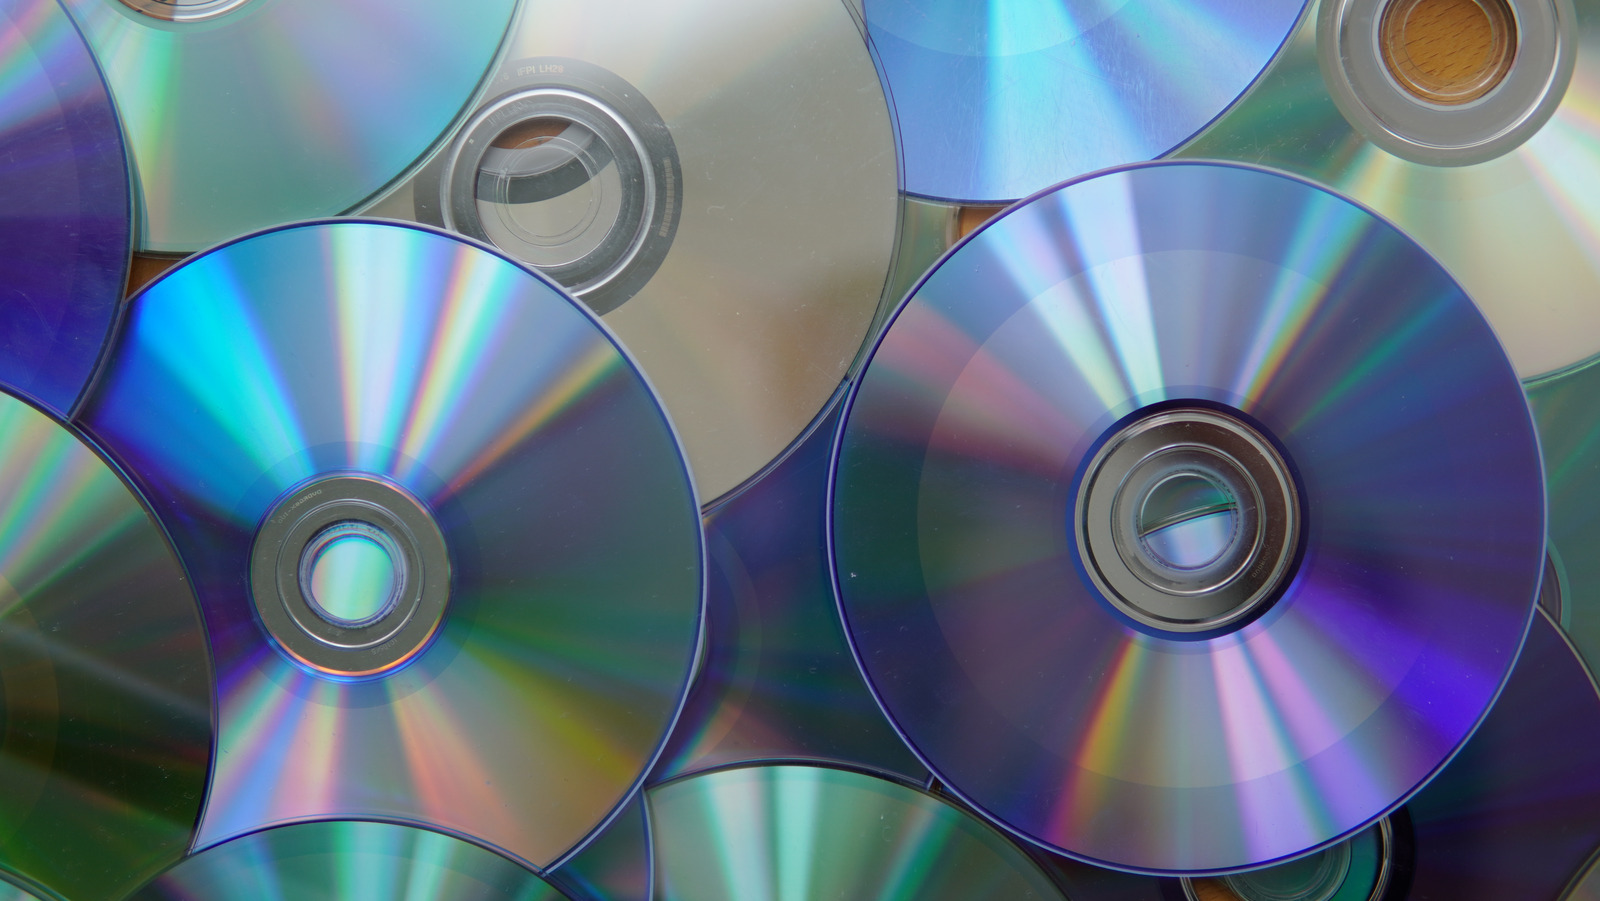 Quickly Remove Scratches From CDs and DVDs